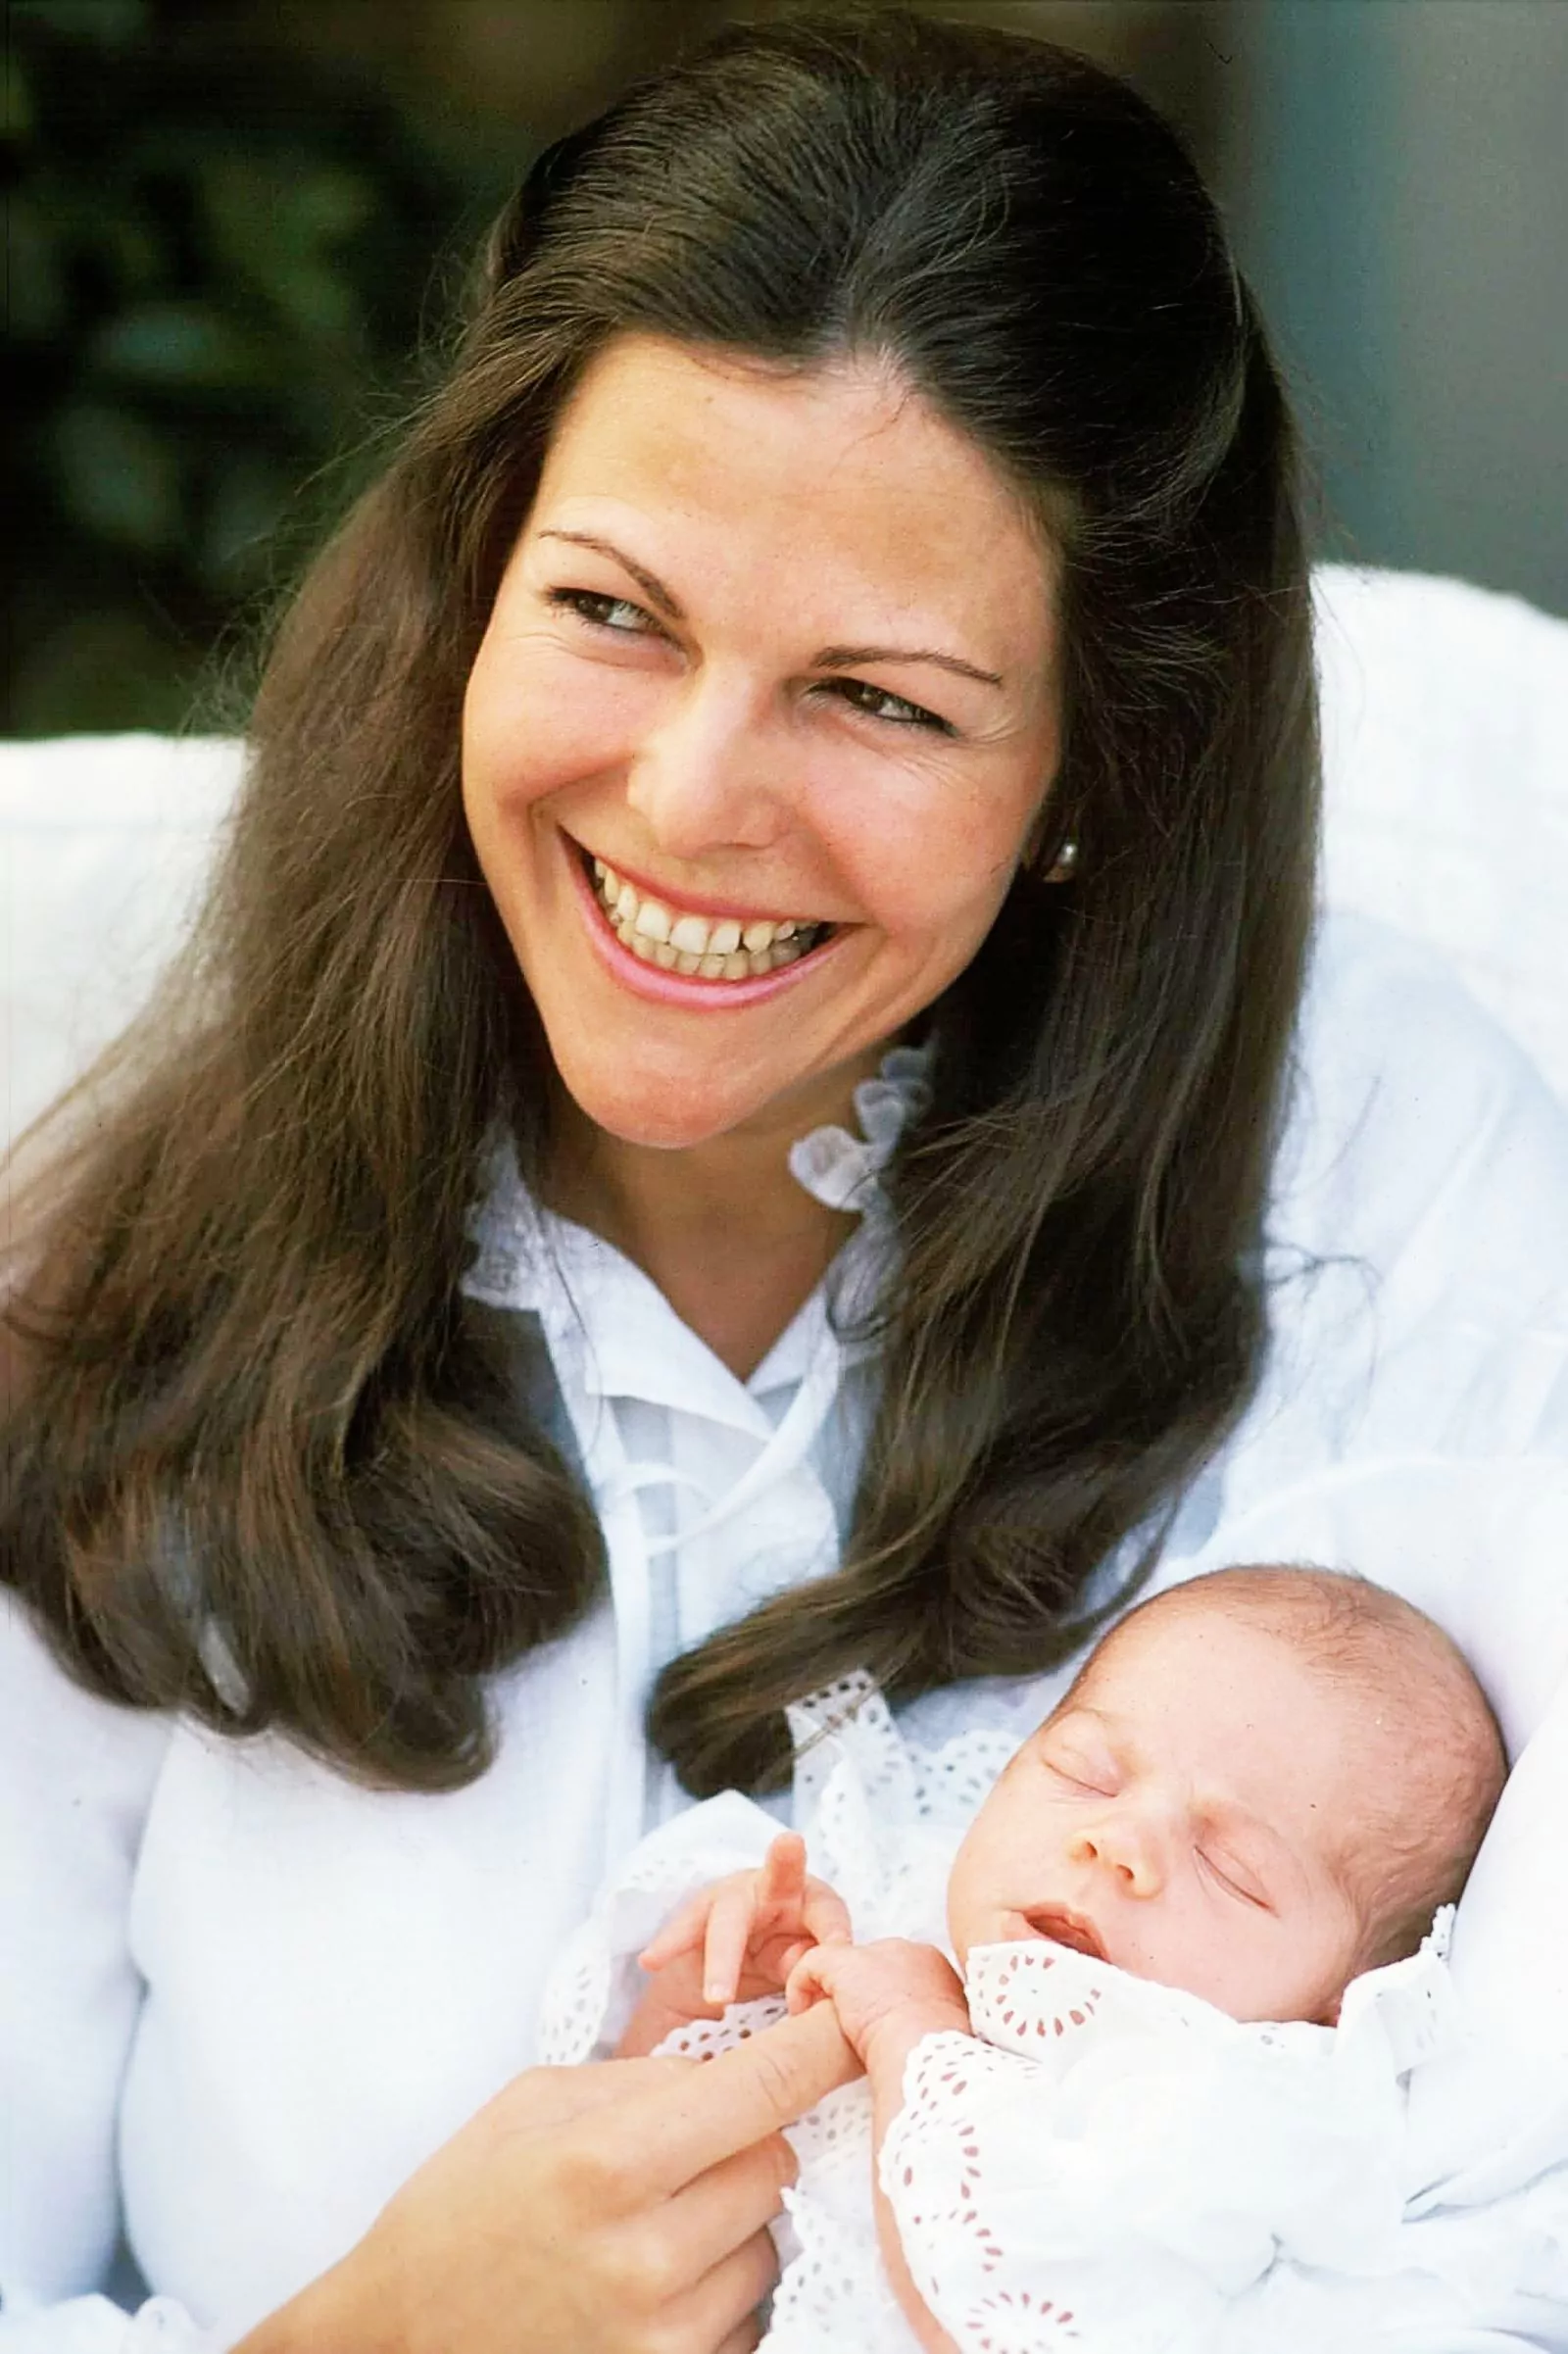 Queen Silvia with the newborn Princess Victoria at Solliden Palace, 1977